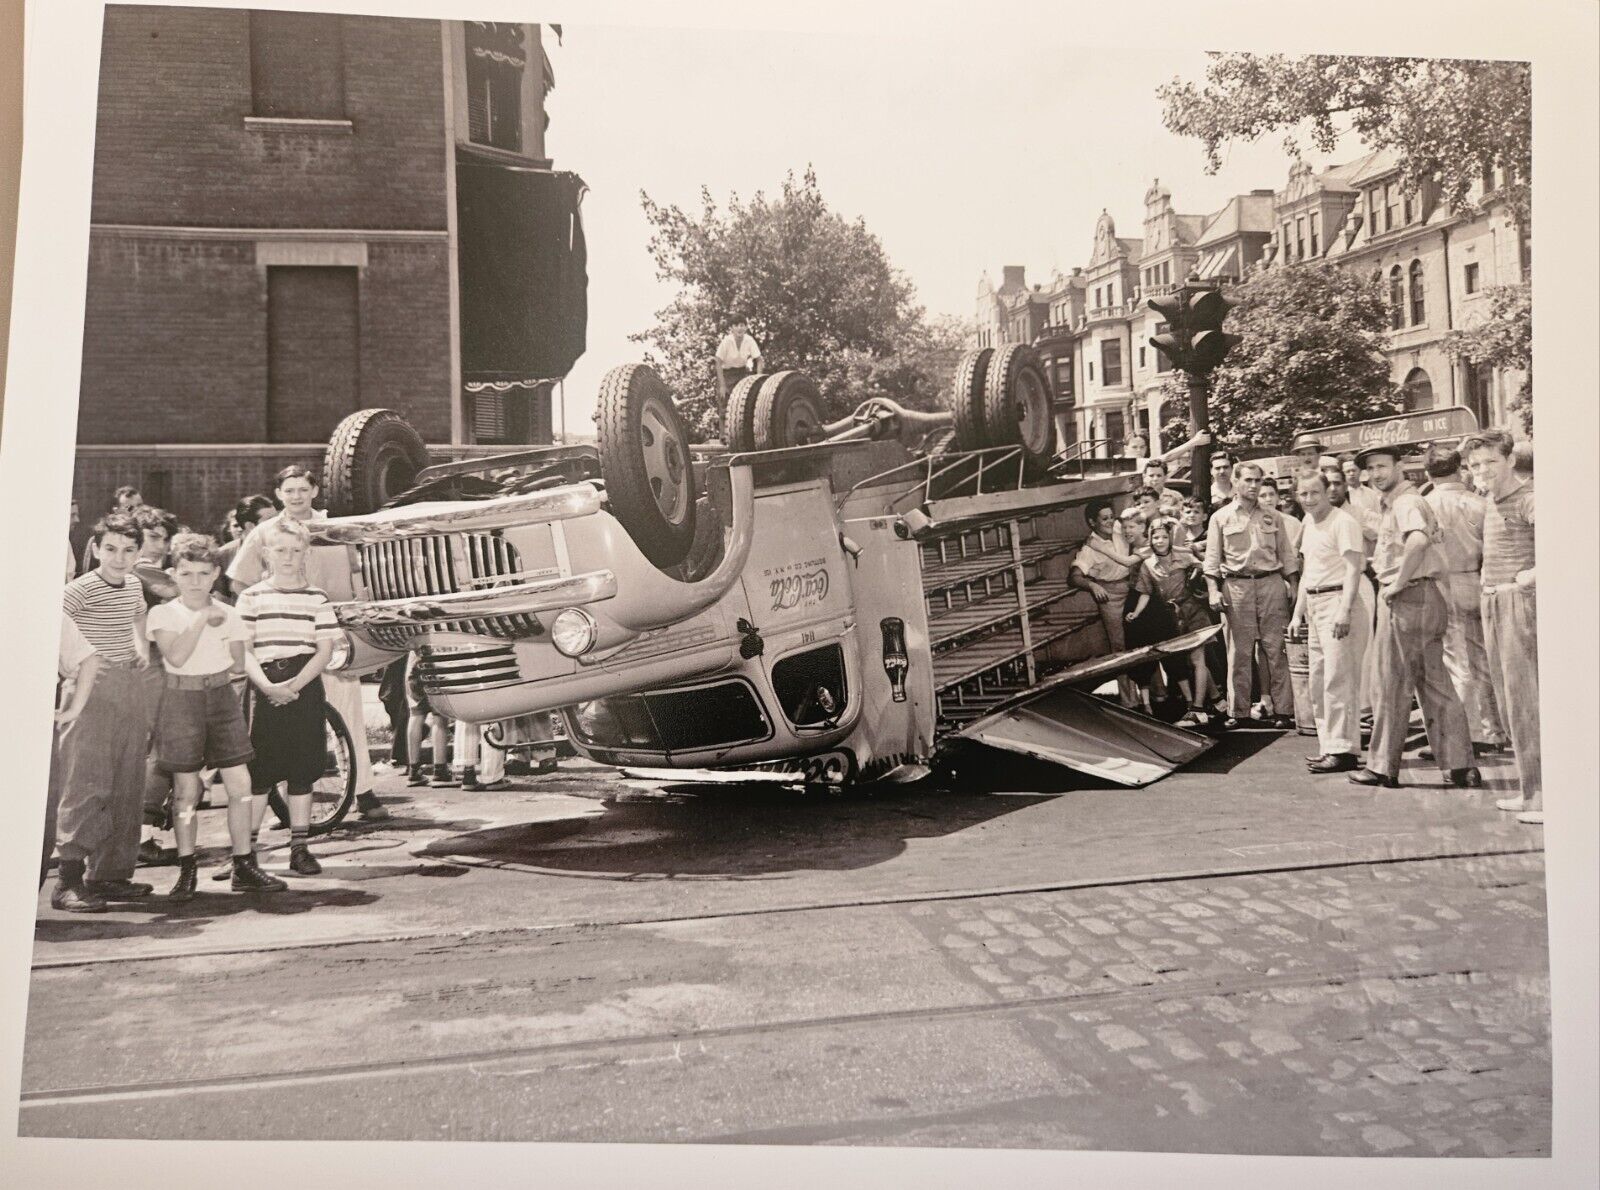 1948 Overturned Coca-Cola TRUCK CROWN HEIGHTS Brooklyn New York City NY Photo